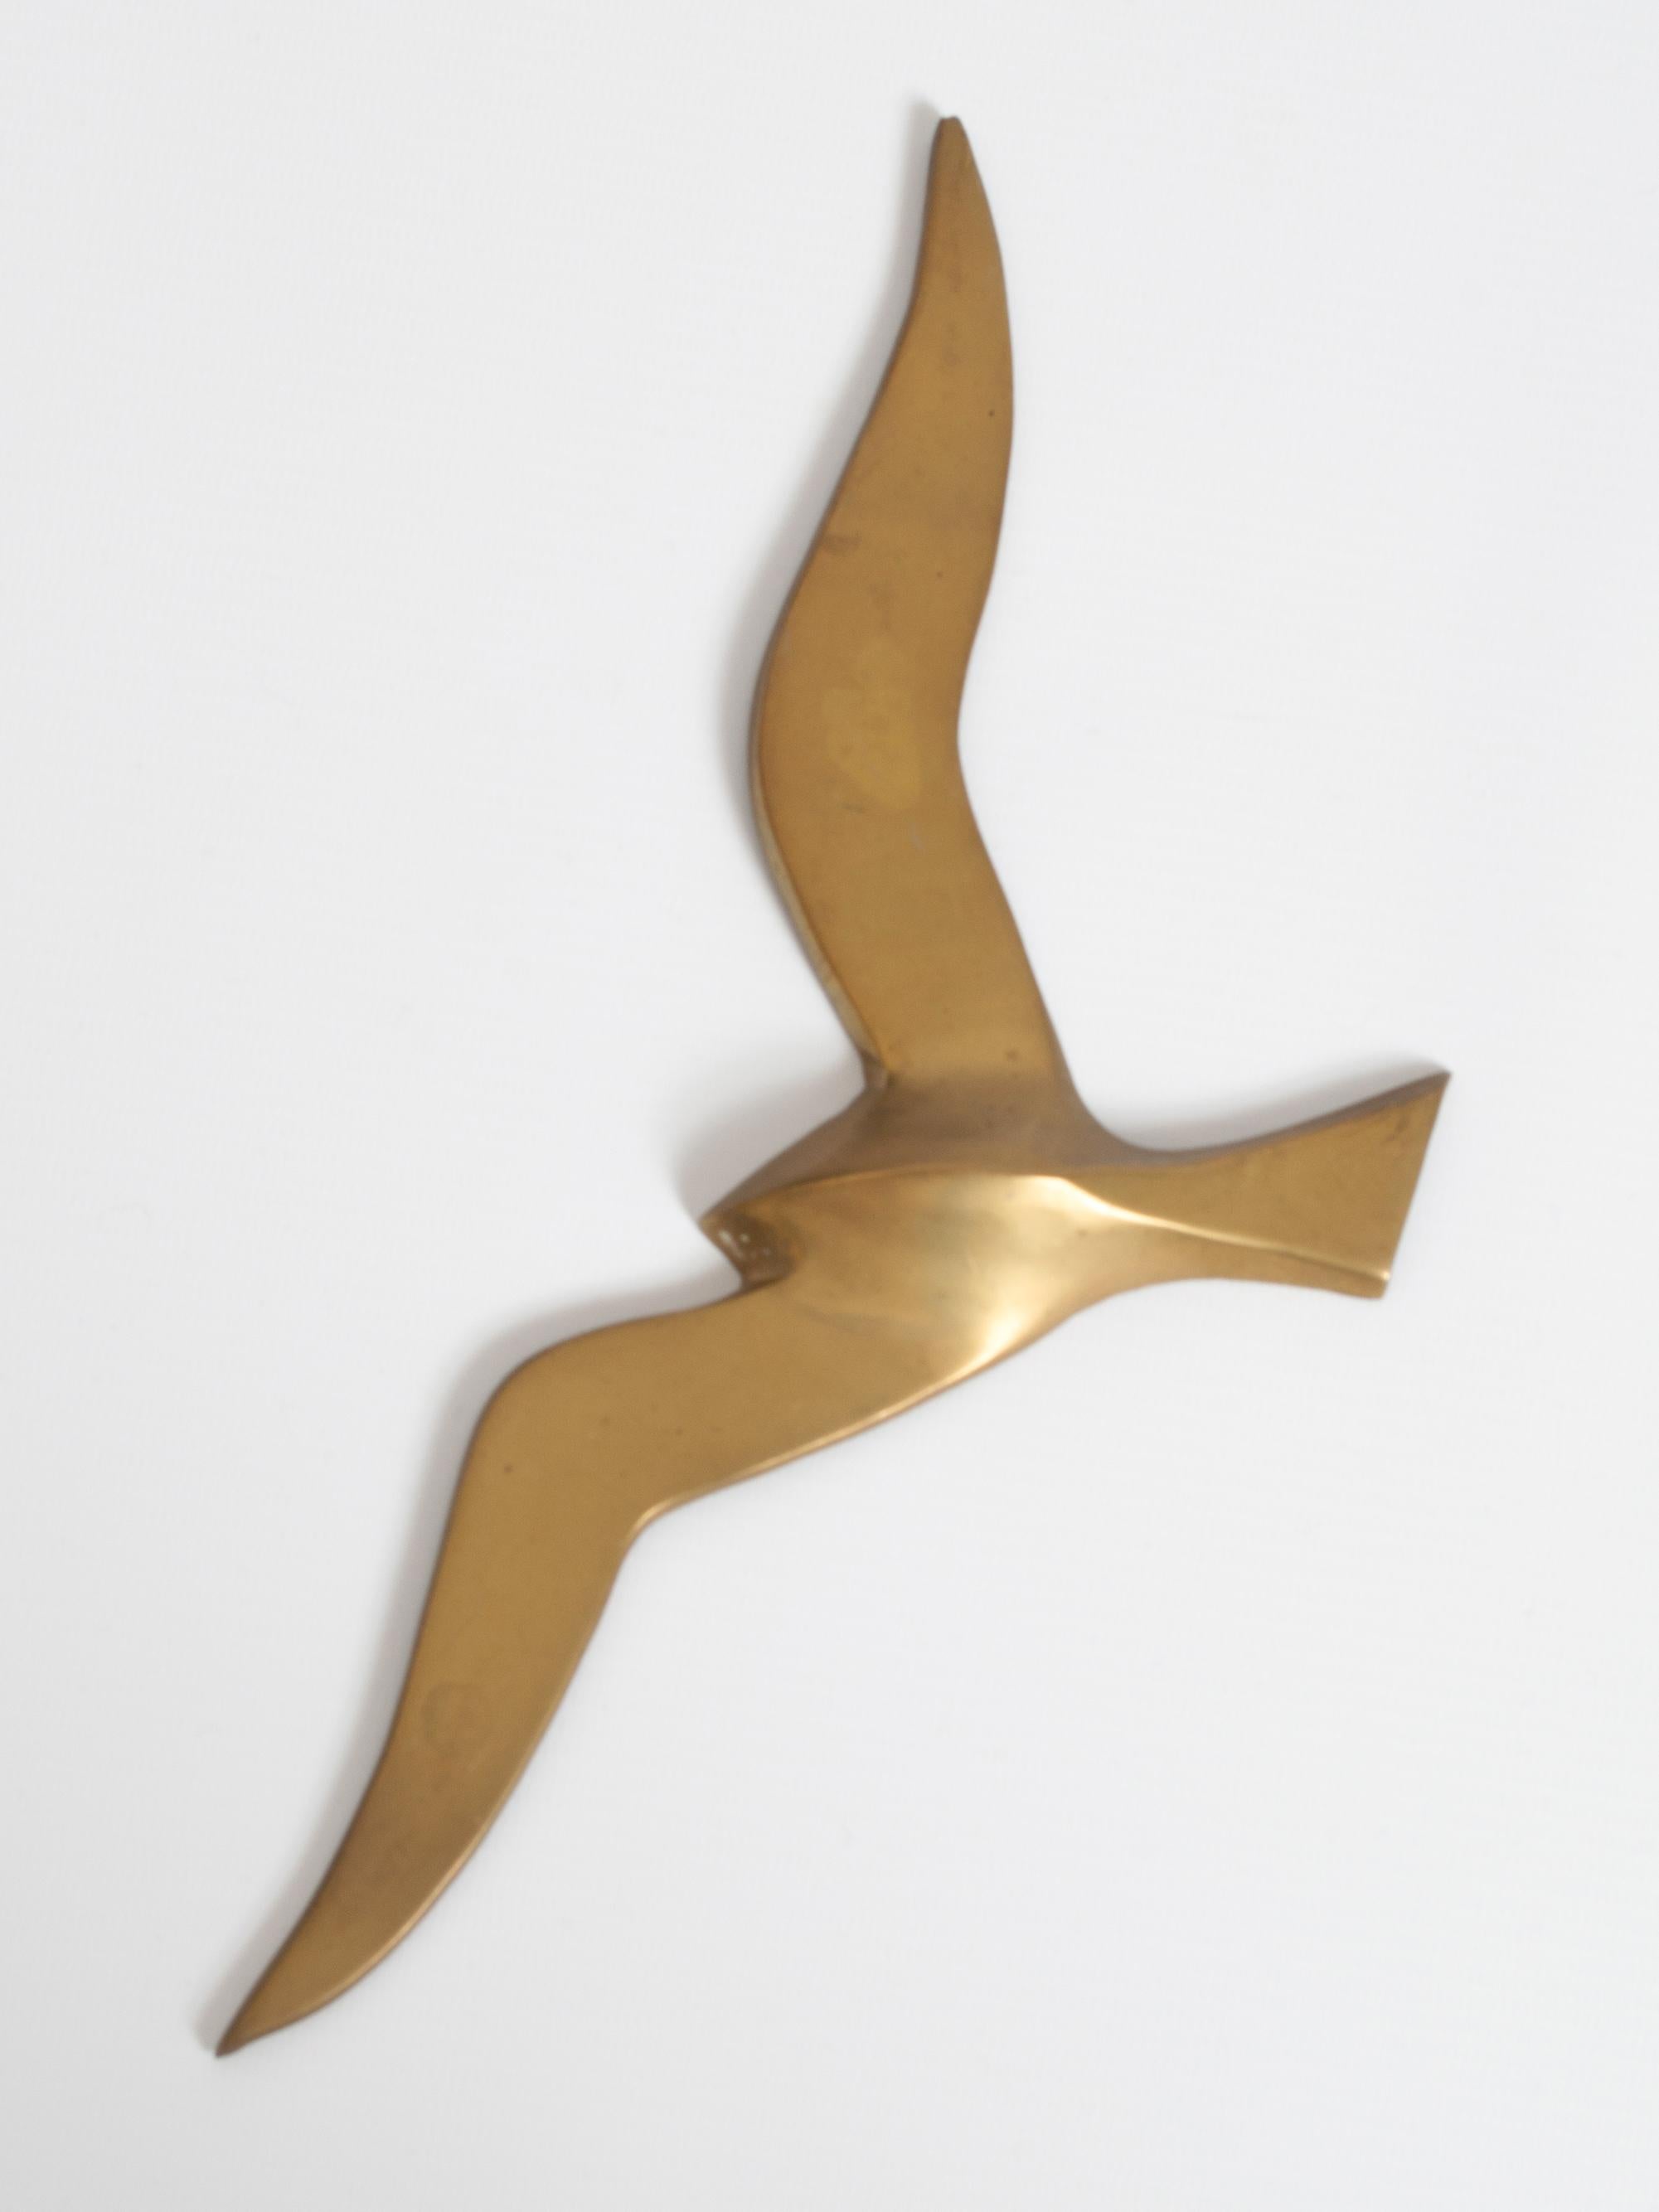 Mid Century Solid Brass Wall Mounted Sculptures of birds in flight, in the manner of Auböck. Austria, Circa 1950.
In very good vintage condition.

Dimensions
Wingspan: 30/20cm
Length: 15/11cm